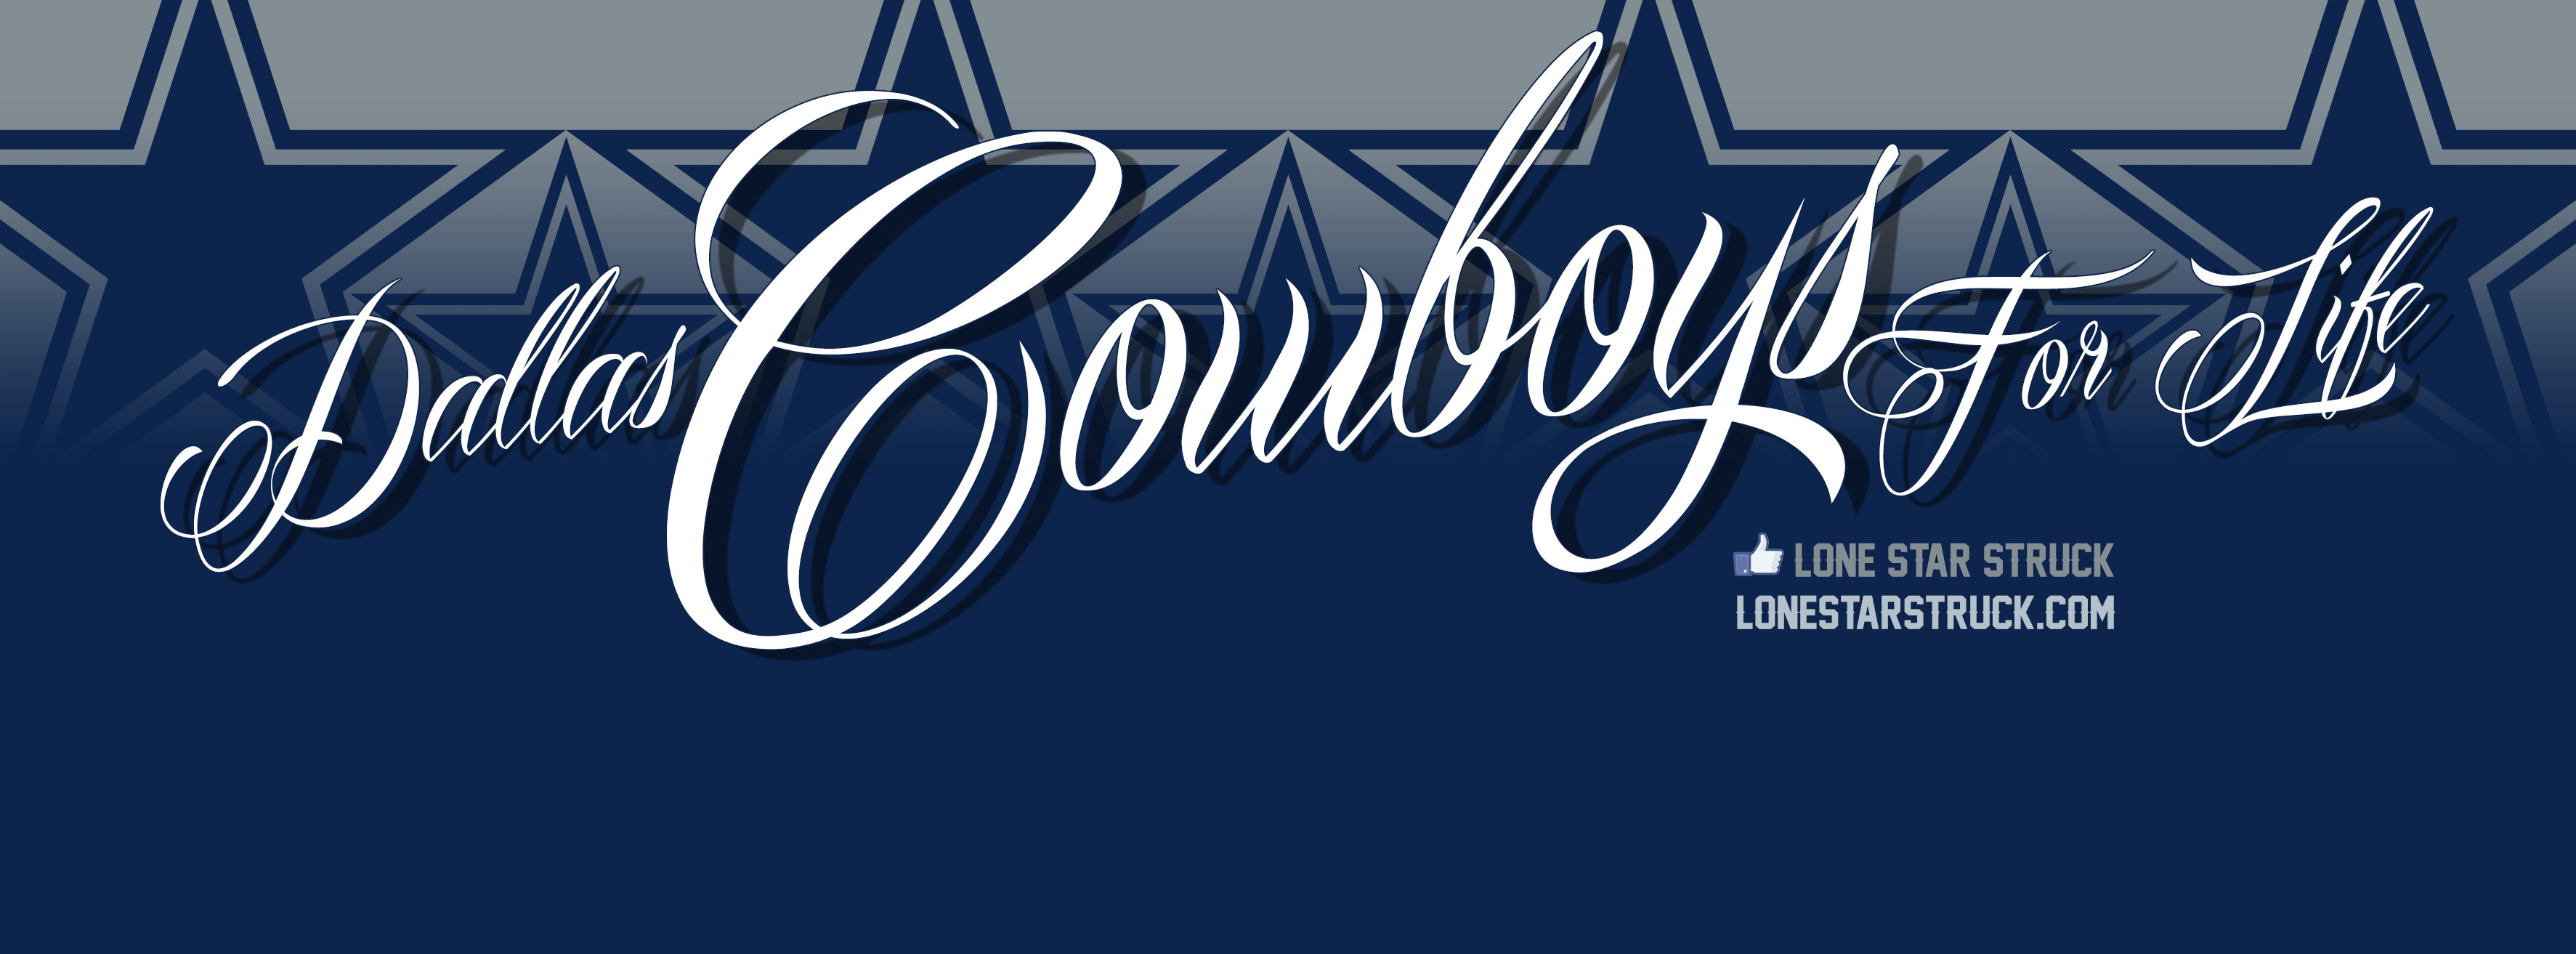 Dallas Cowboys For Life Covers 6 variations